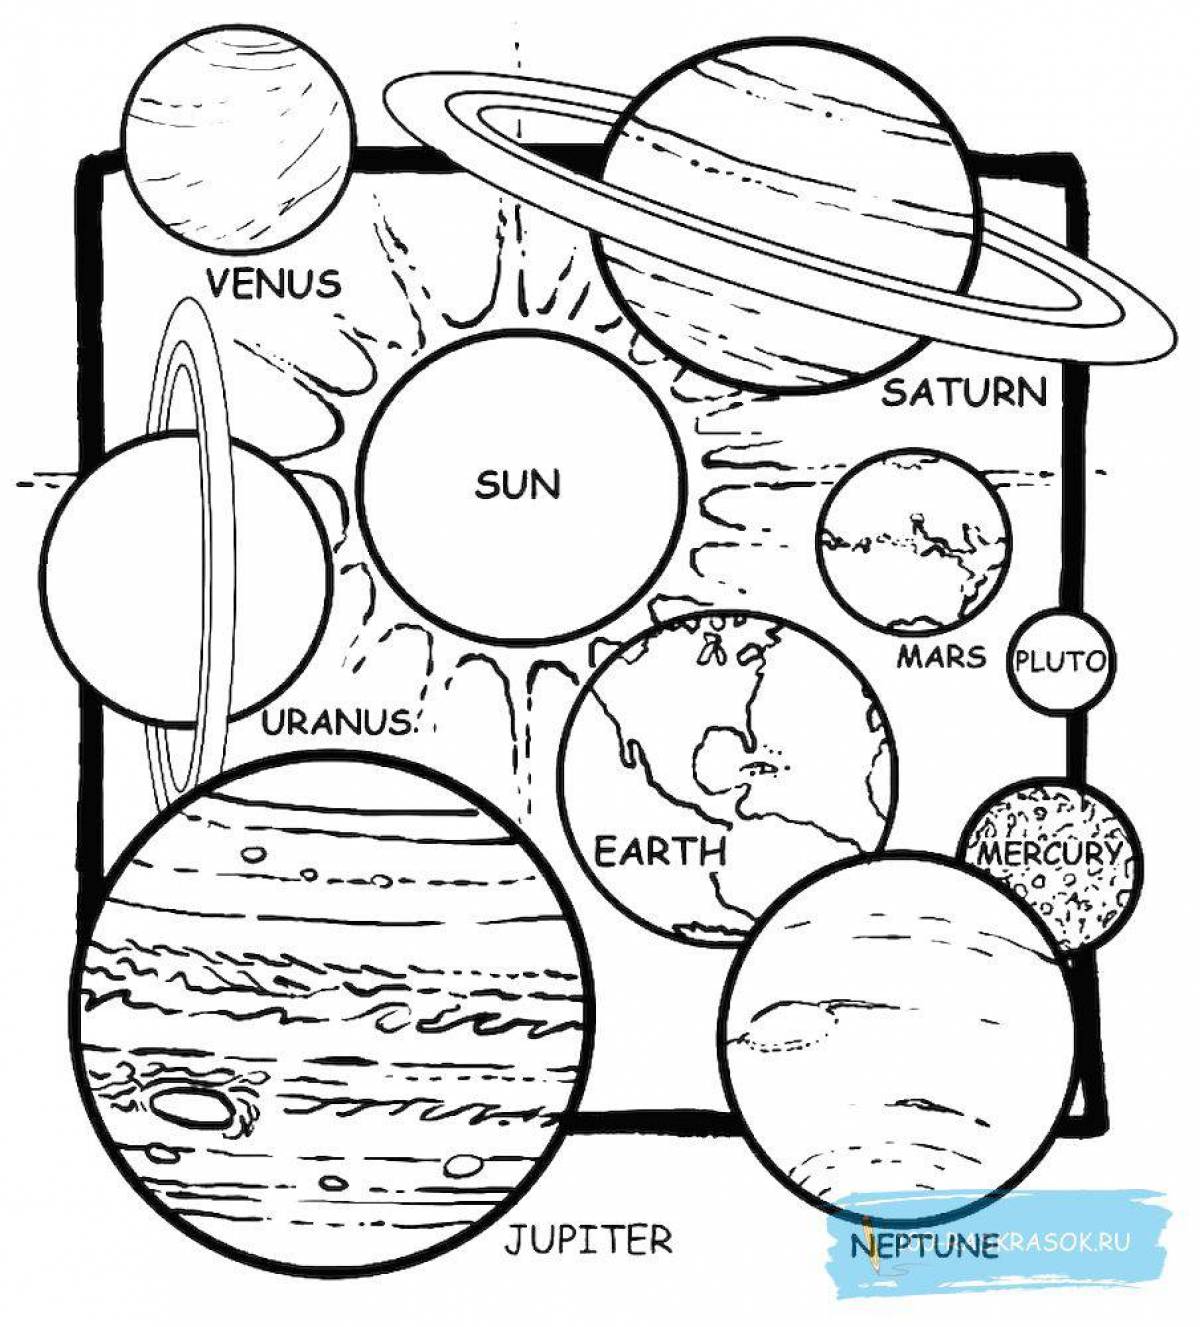 Colour coloring of the planets of the solar system for children